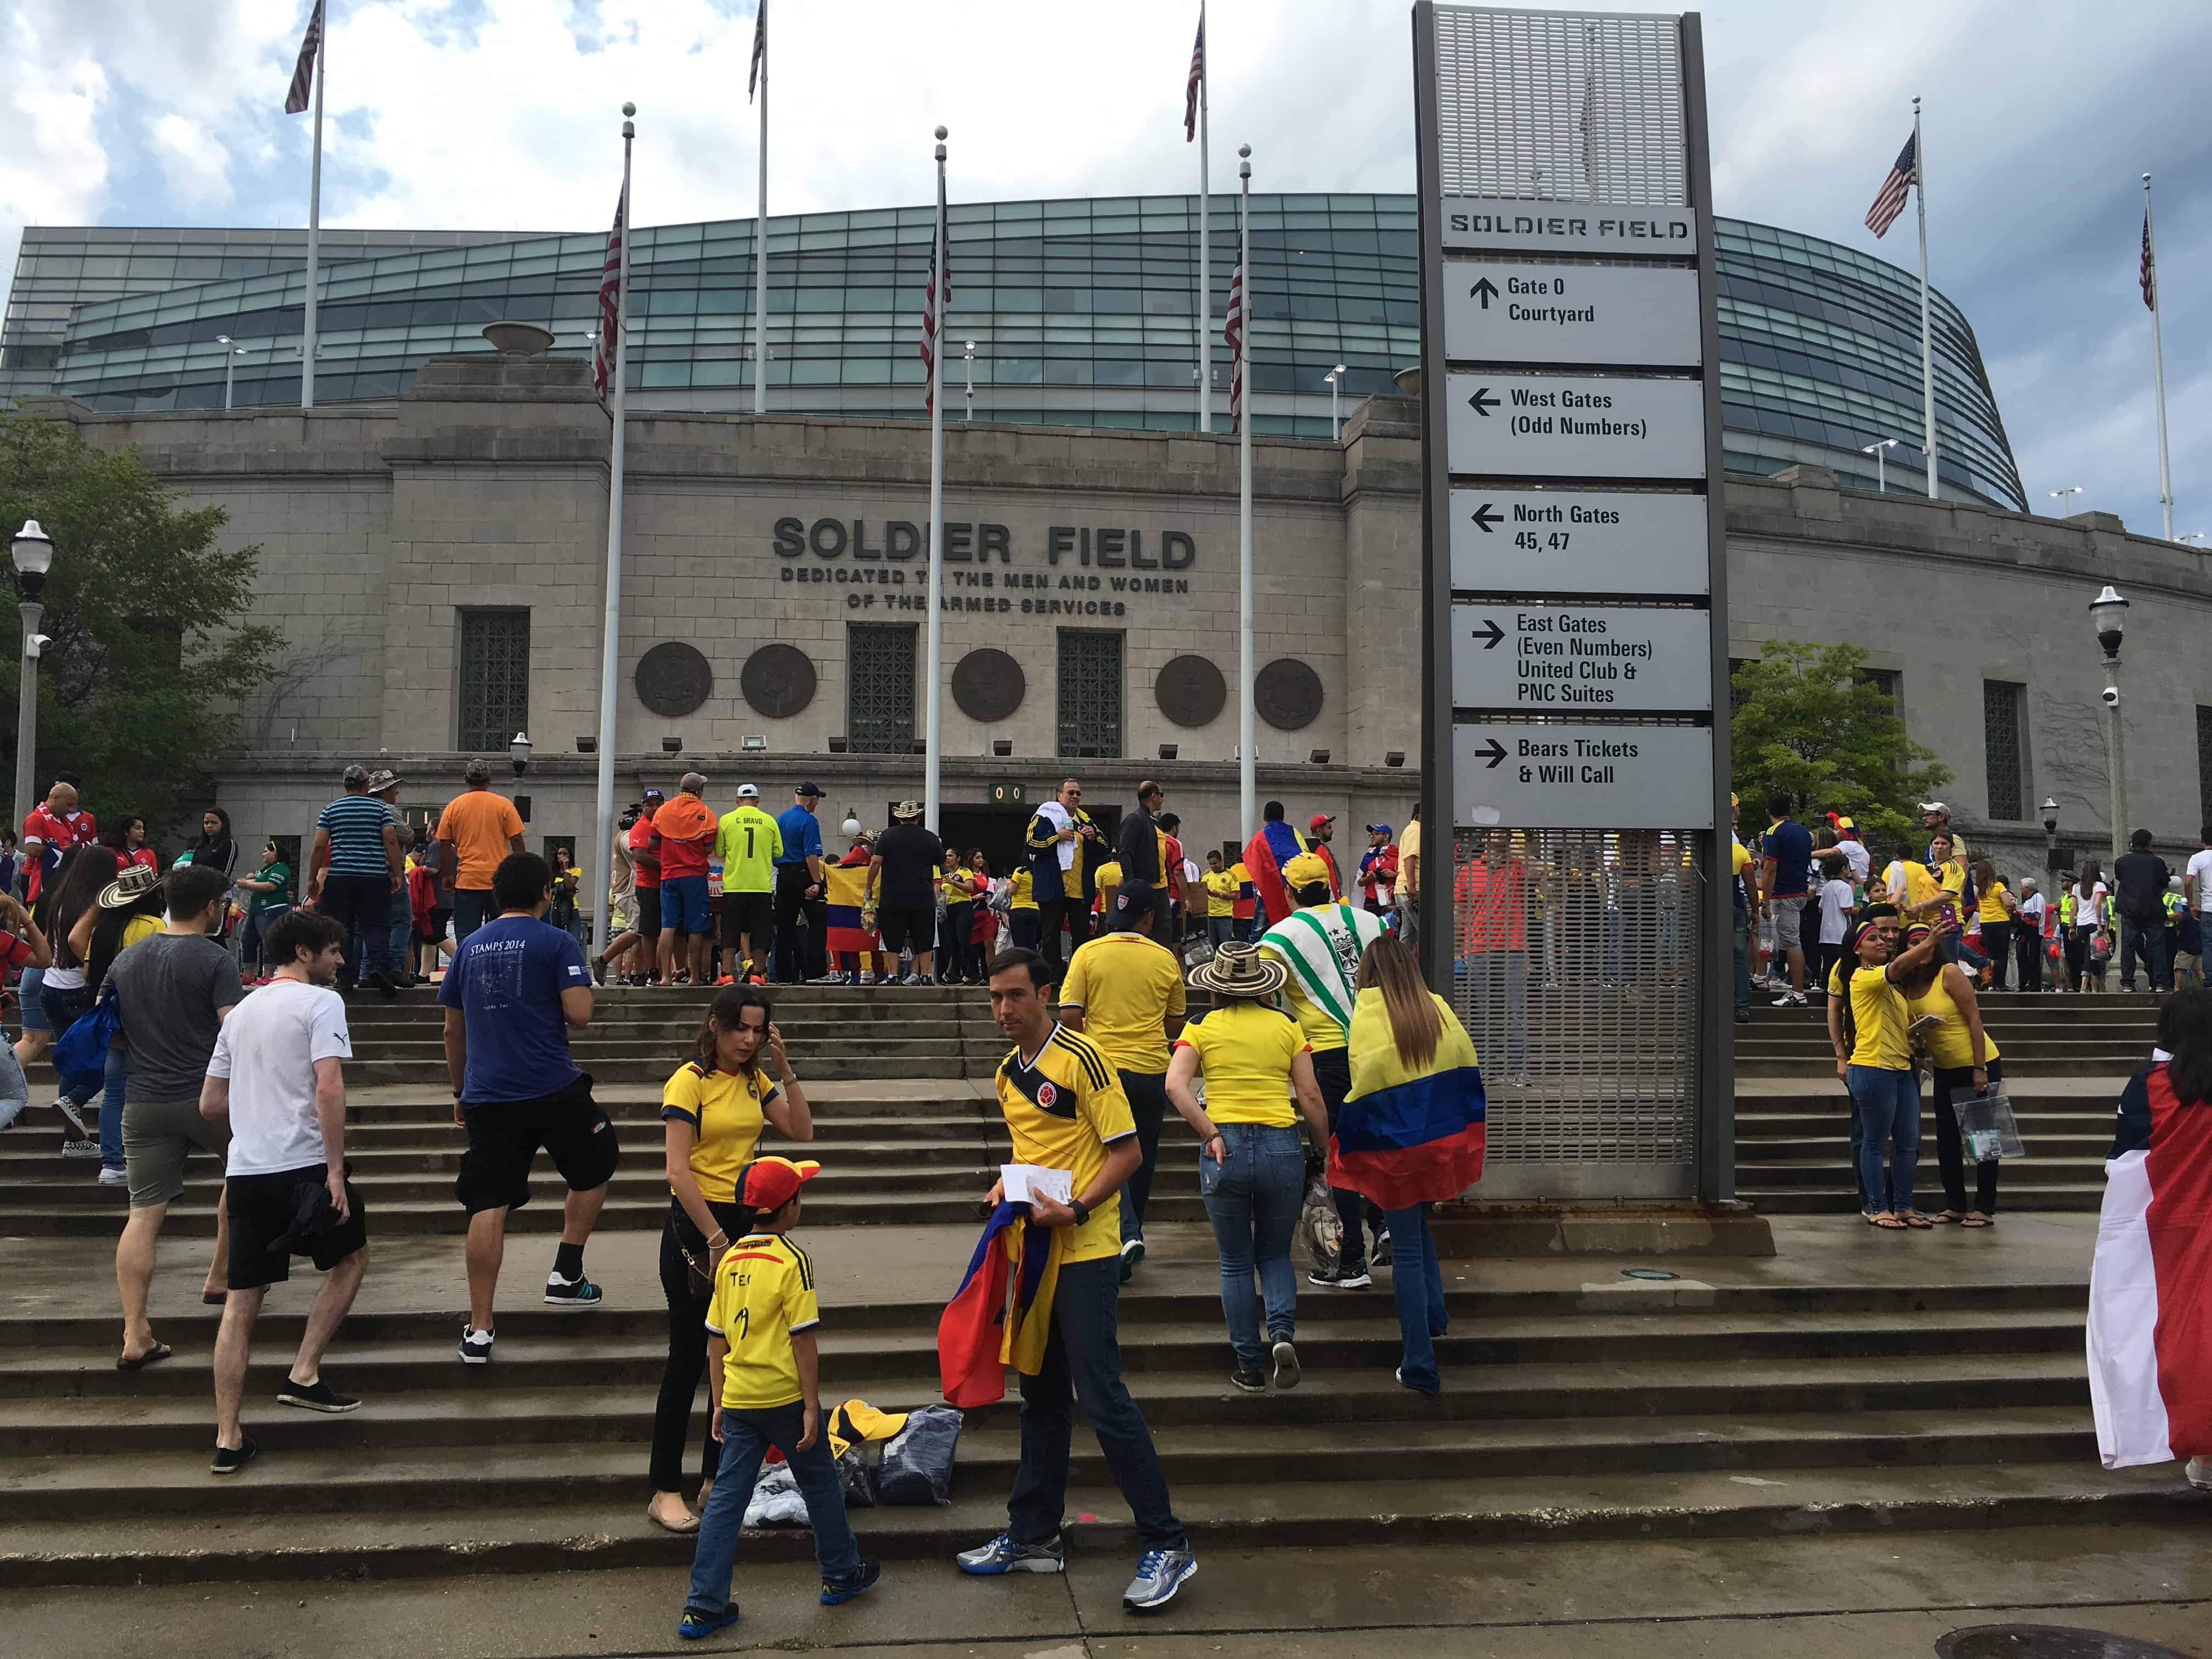 Walking up to Soldier Field for Colombia vs Chile at Copa América Centenario USA 2016 in Chicago, Illinois